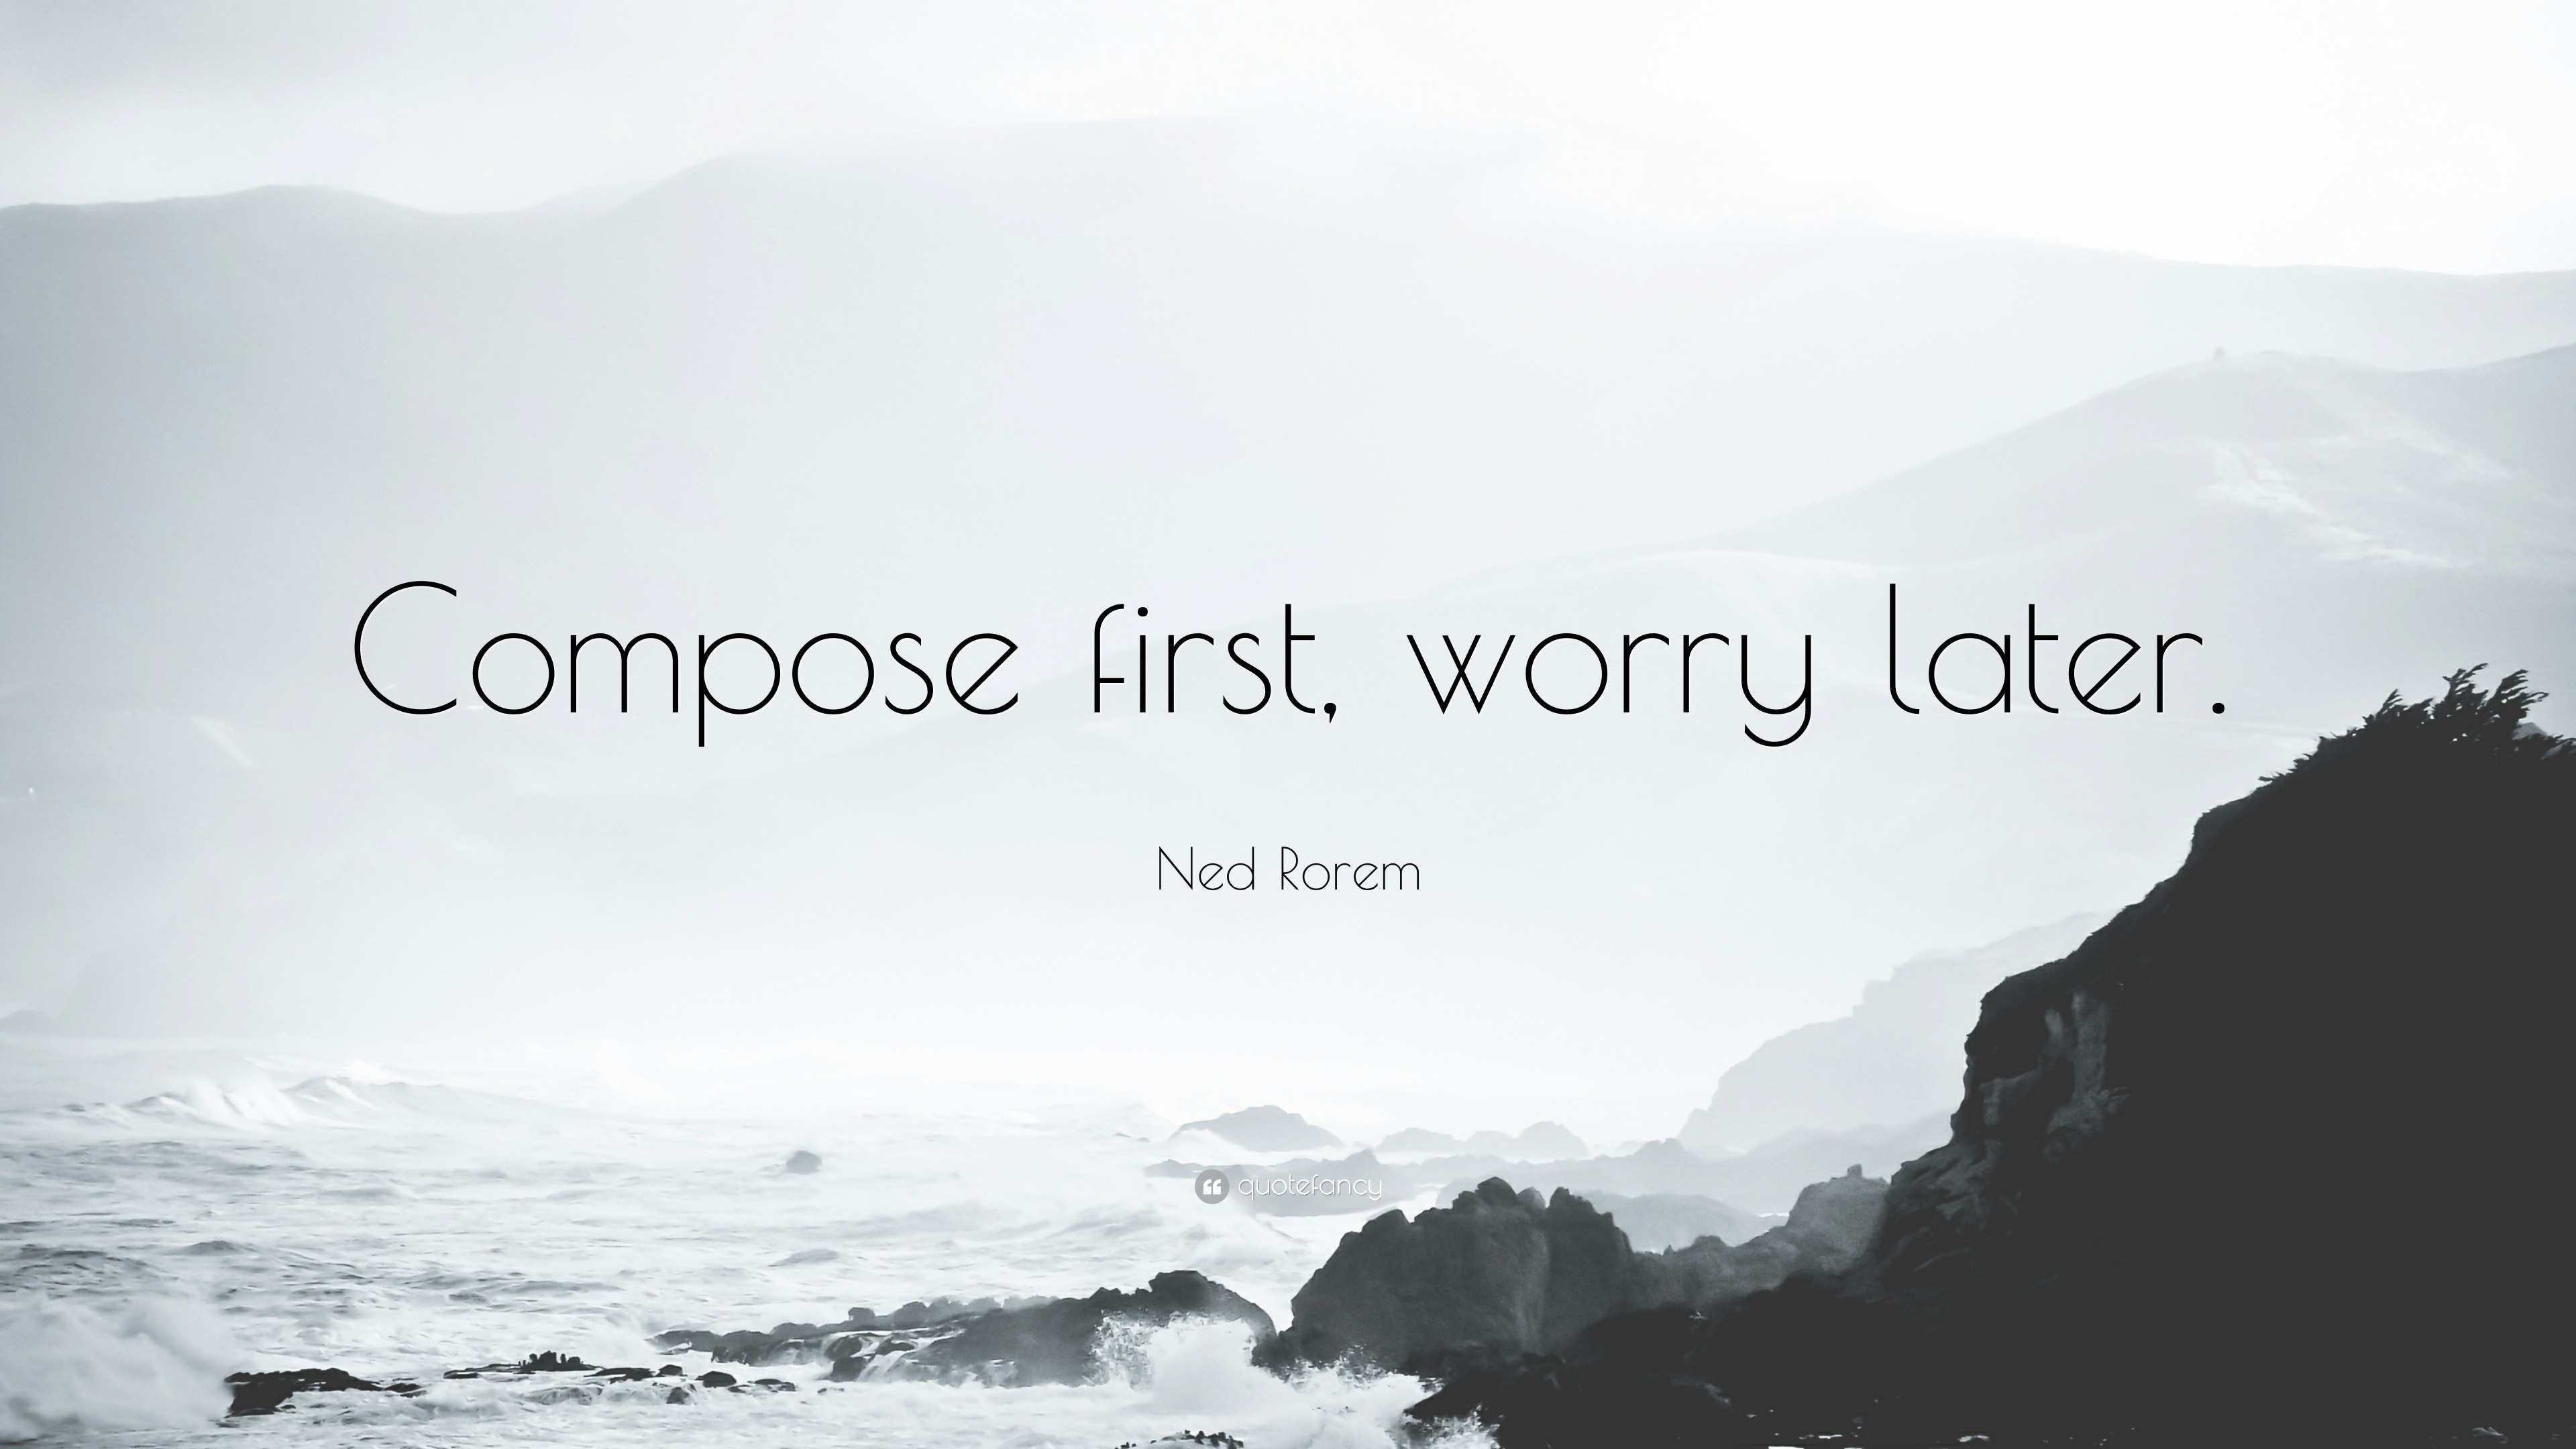 Ned Rorem Quote: “Compose first, worry later.”